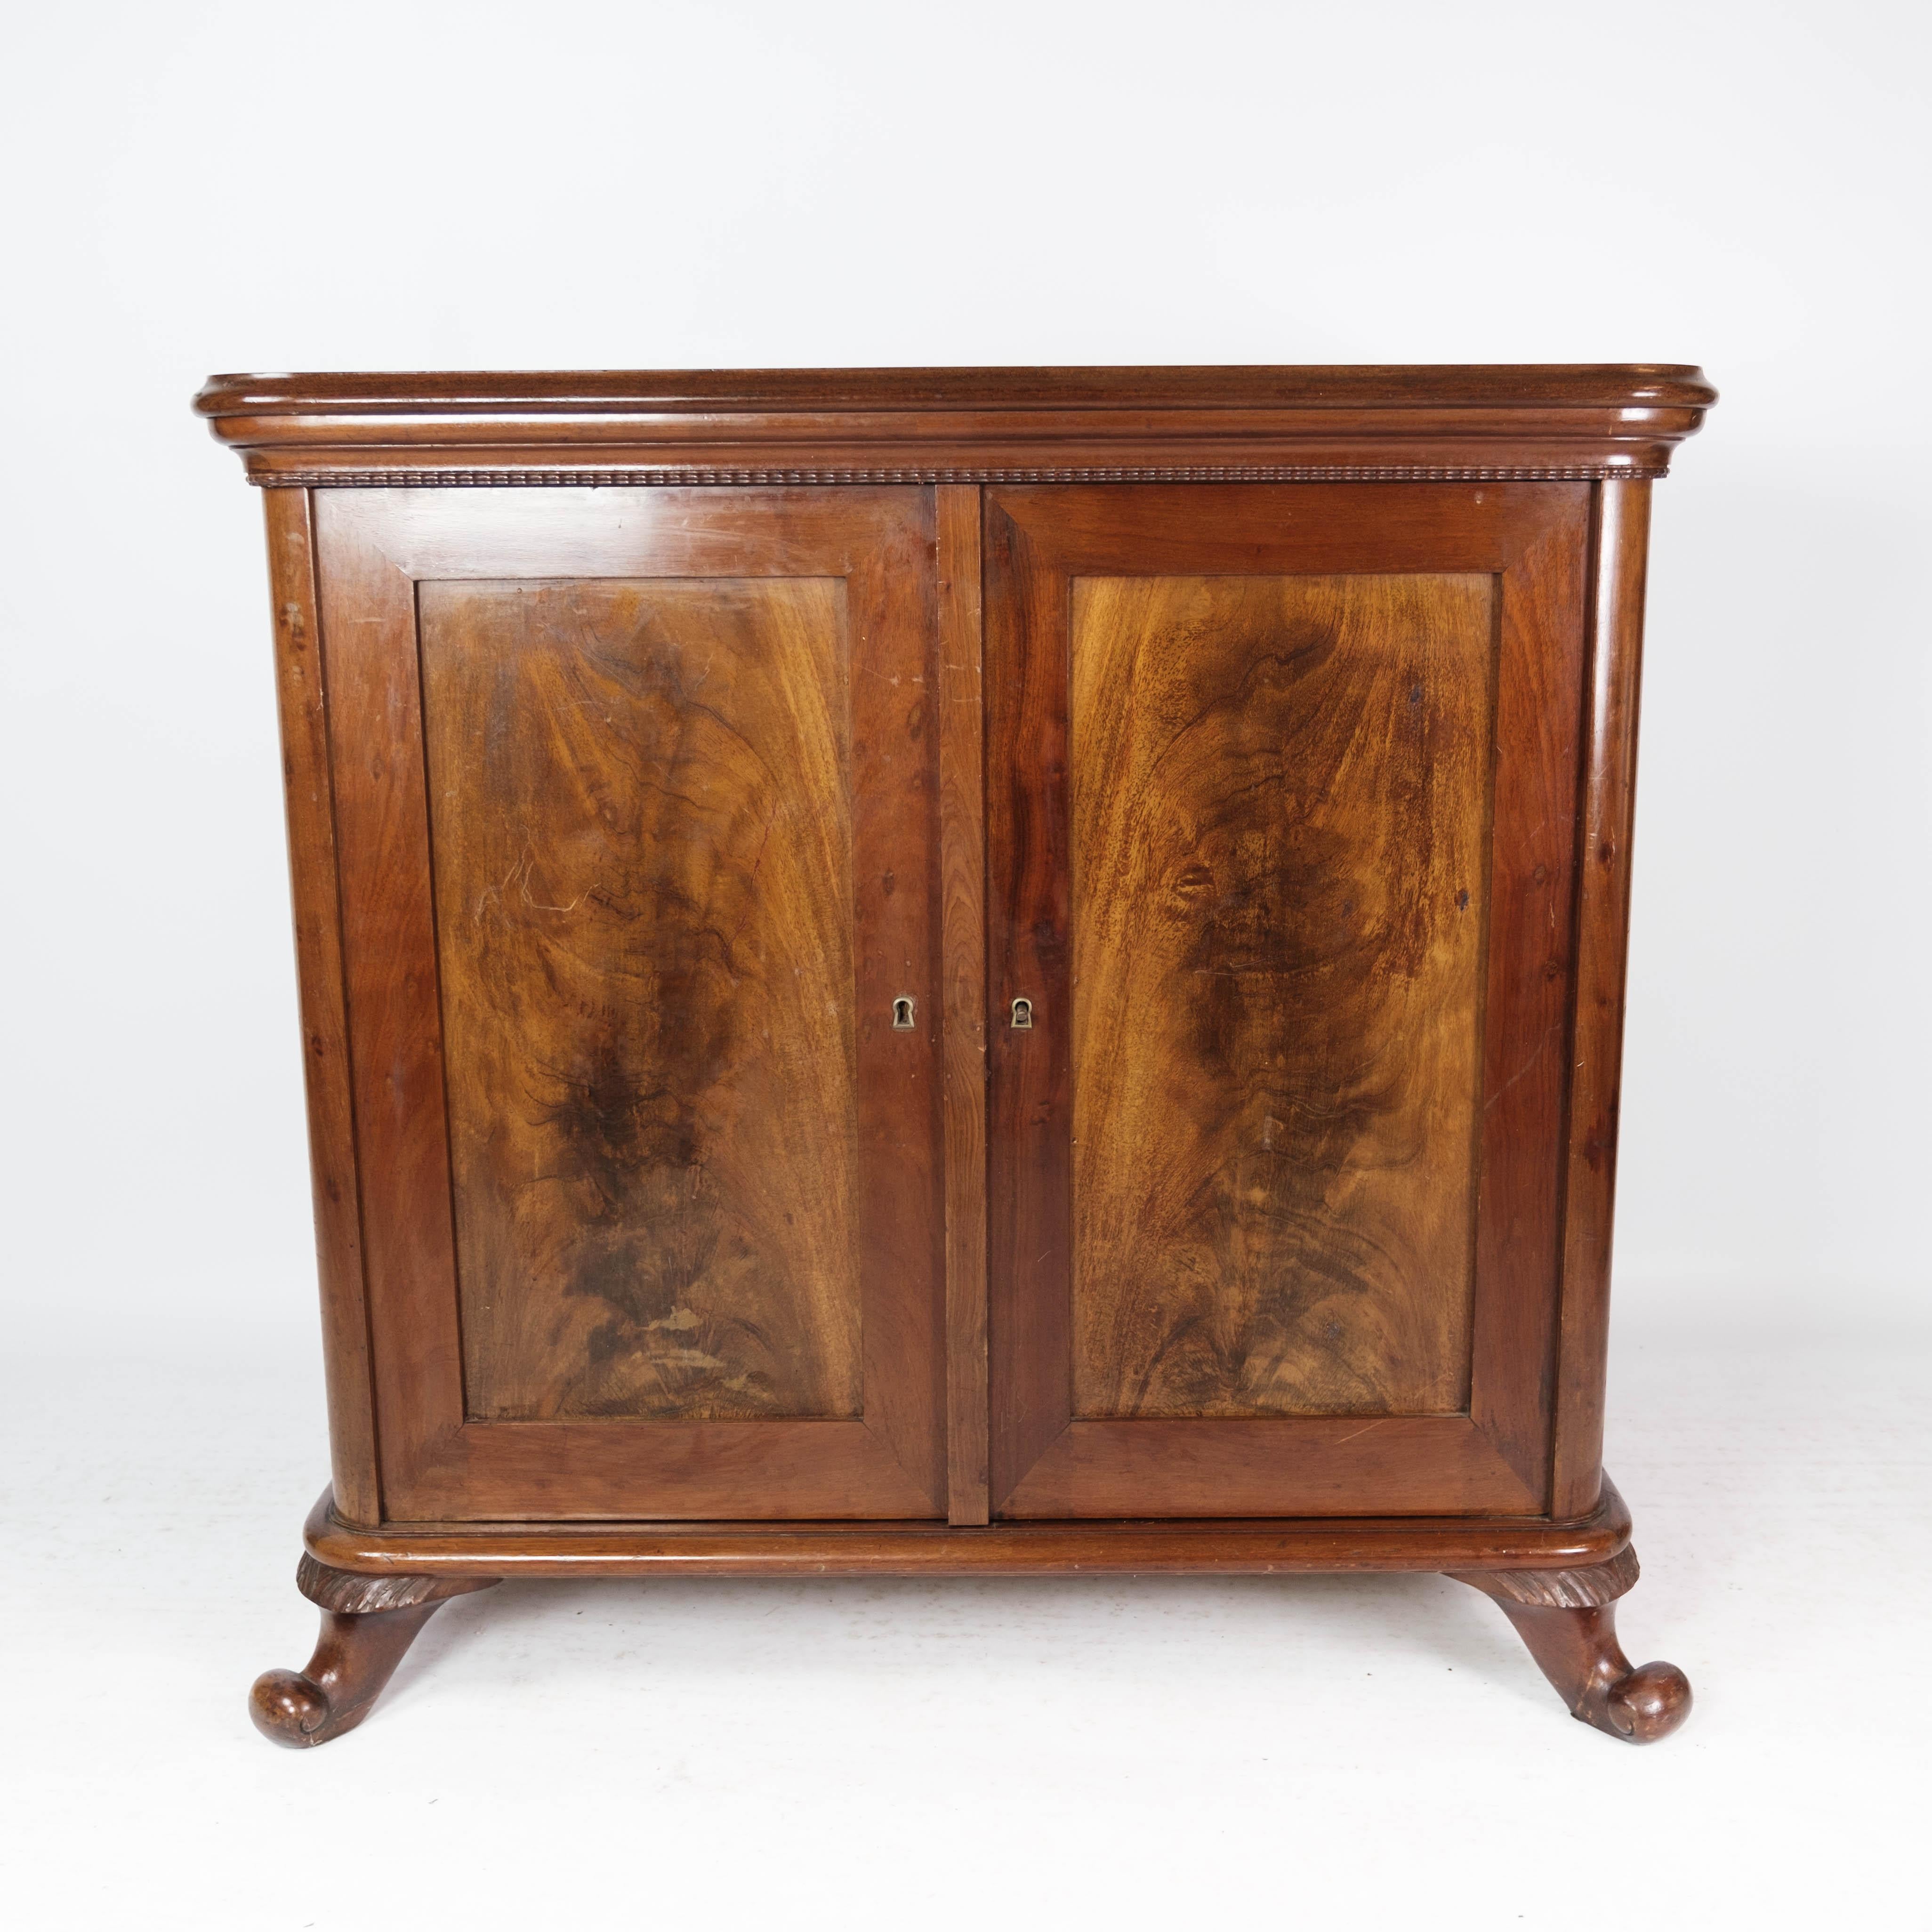 Cabinet of mahogany on feet, in great antique condition from 1890.